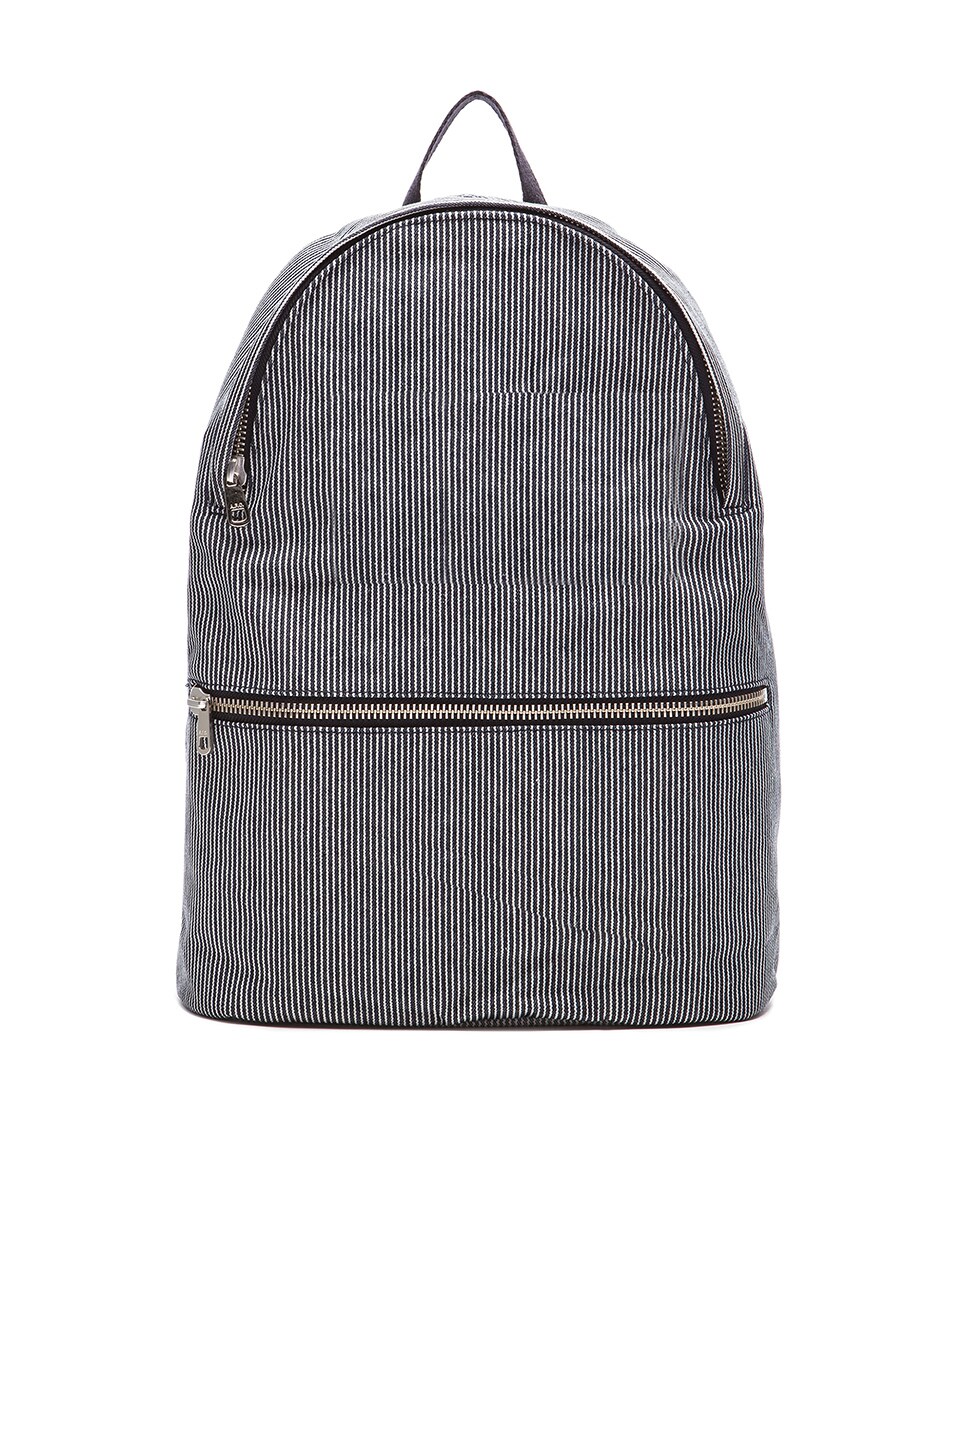 Image 1 of A.P.C. William Backpack in Dark Navy